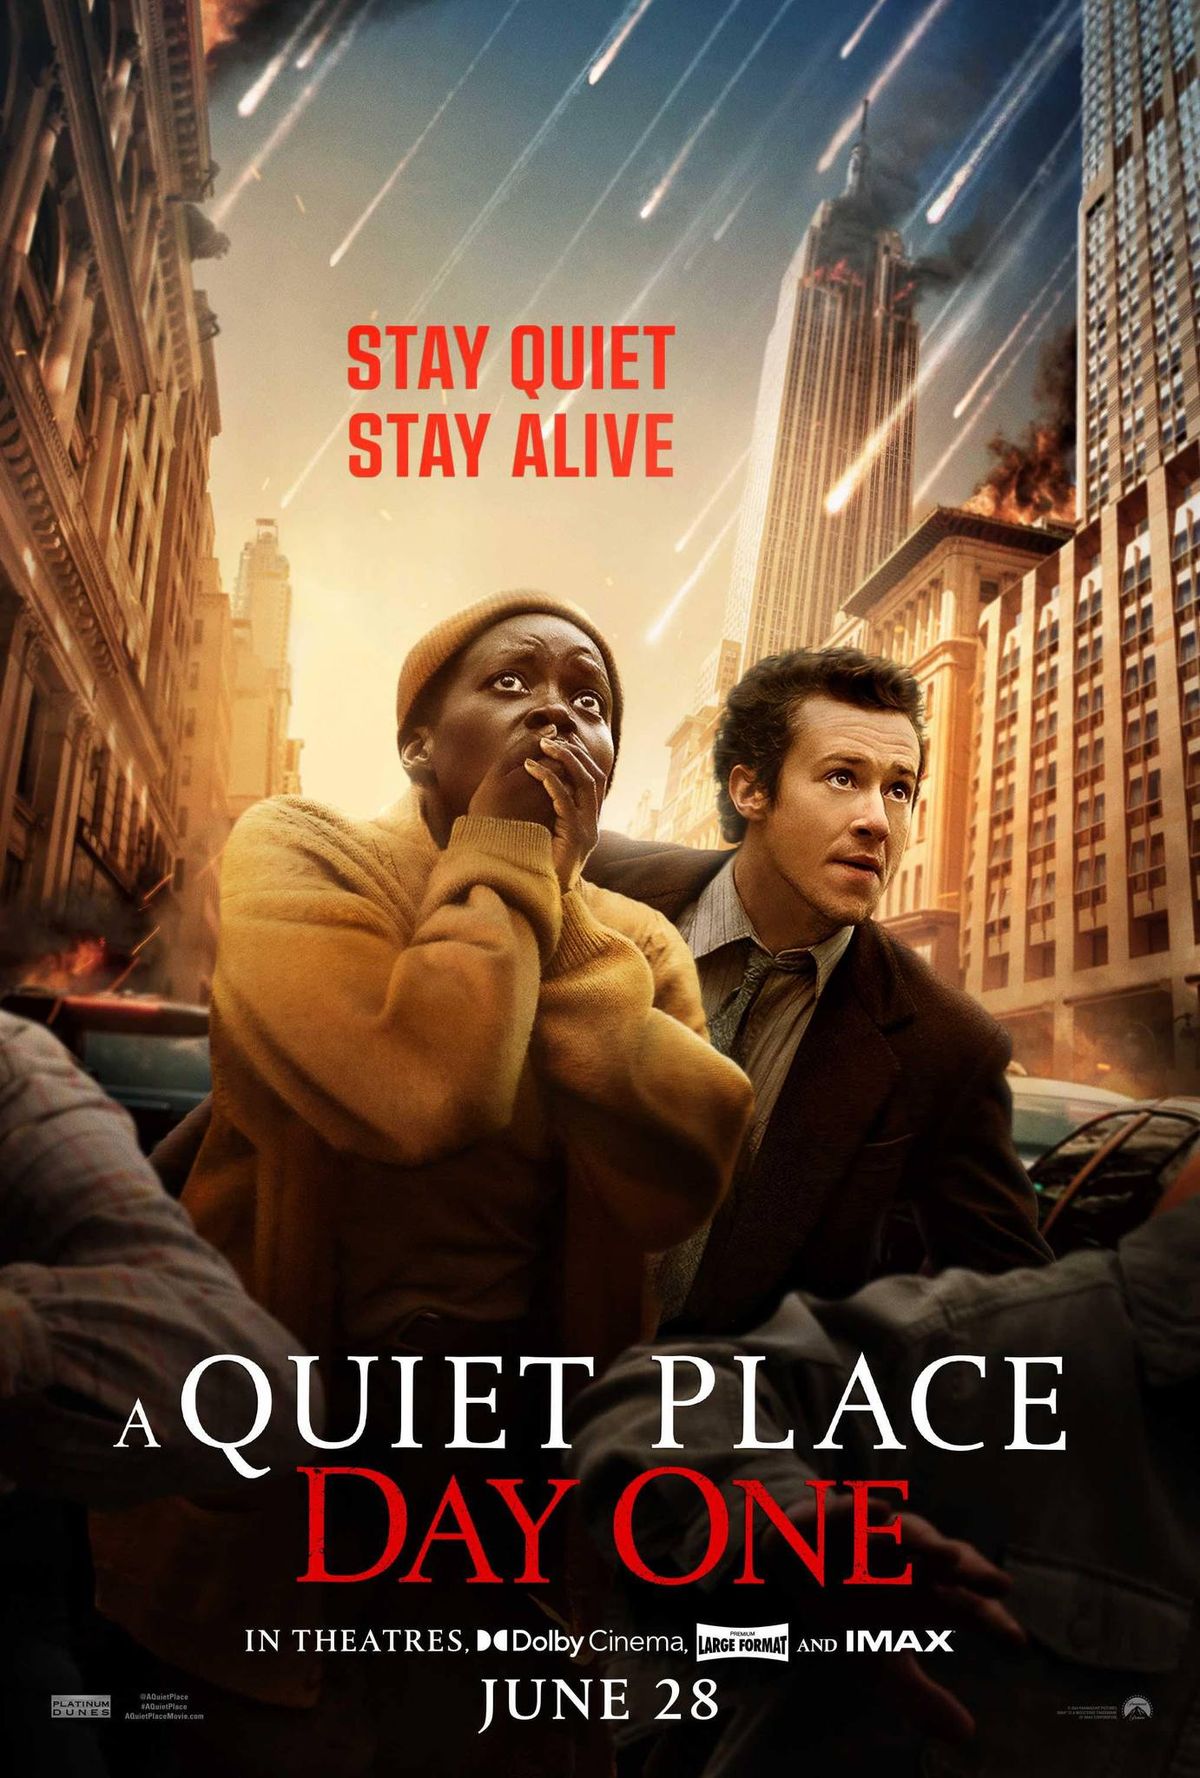 A QUIET PLACE: DAY ONE  Free Screening